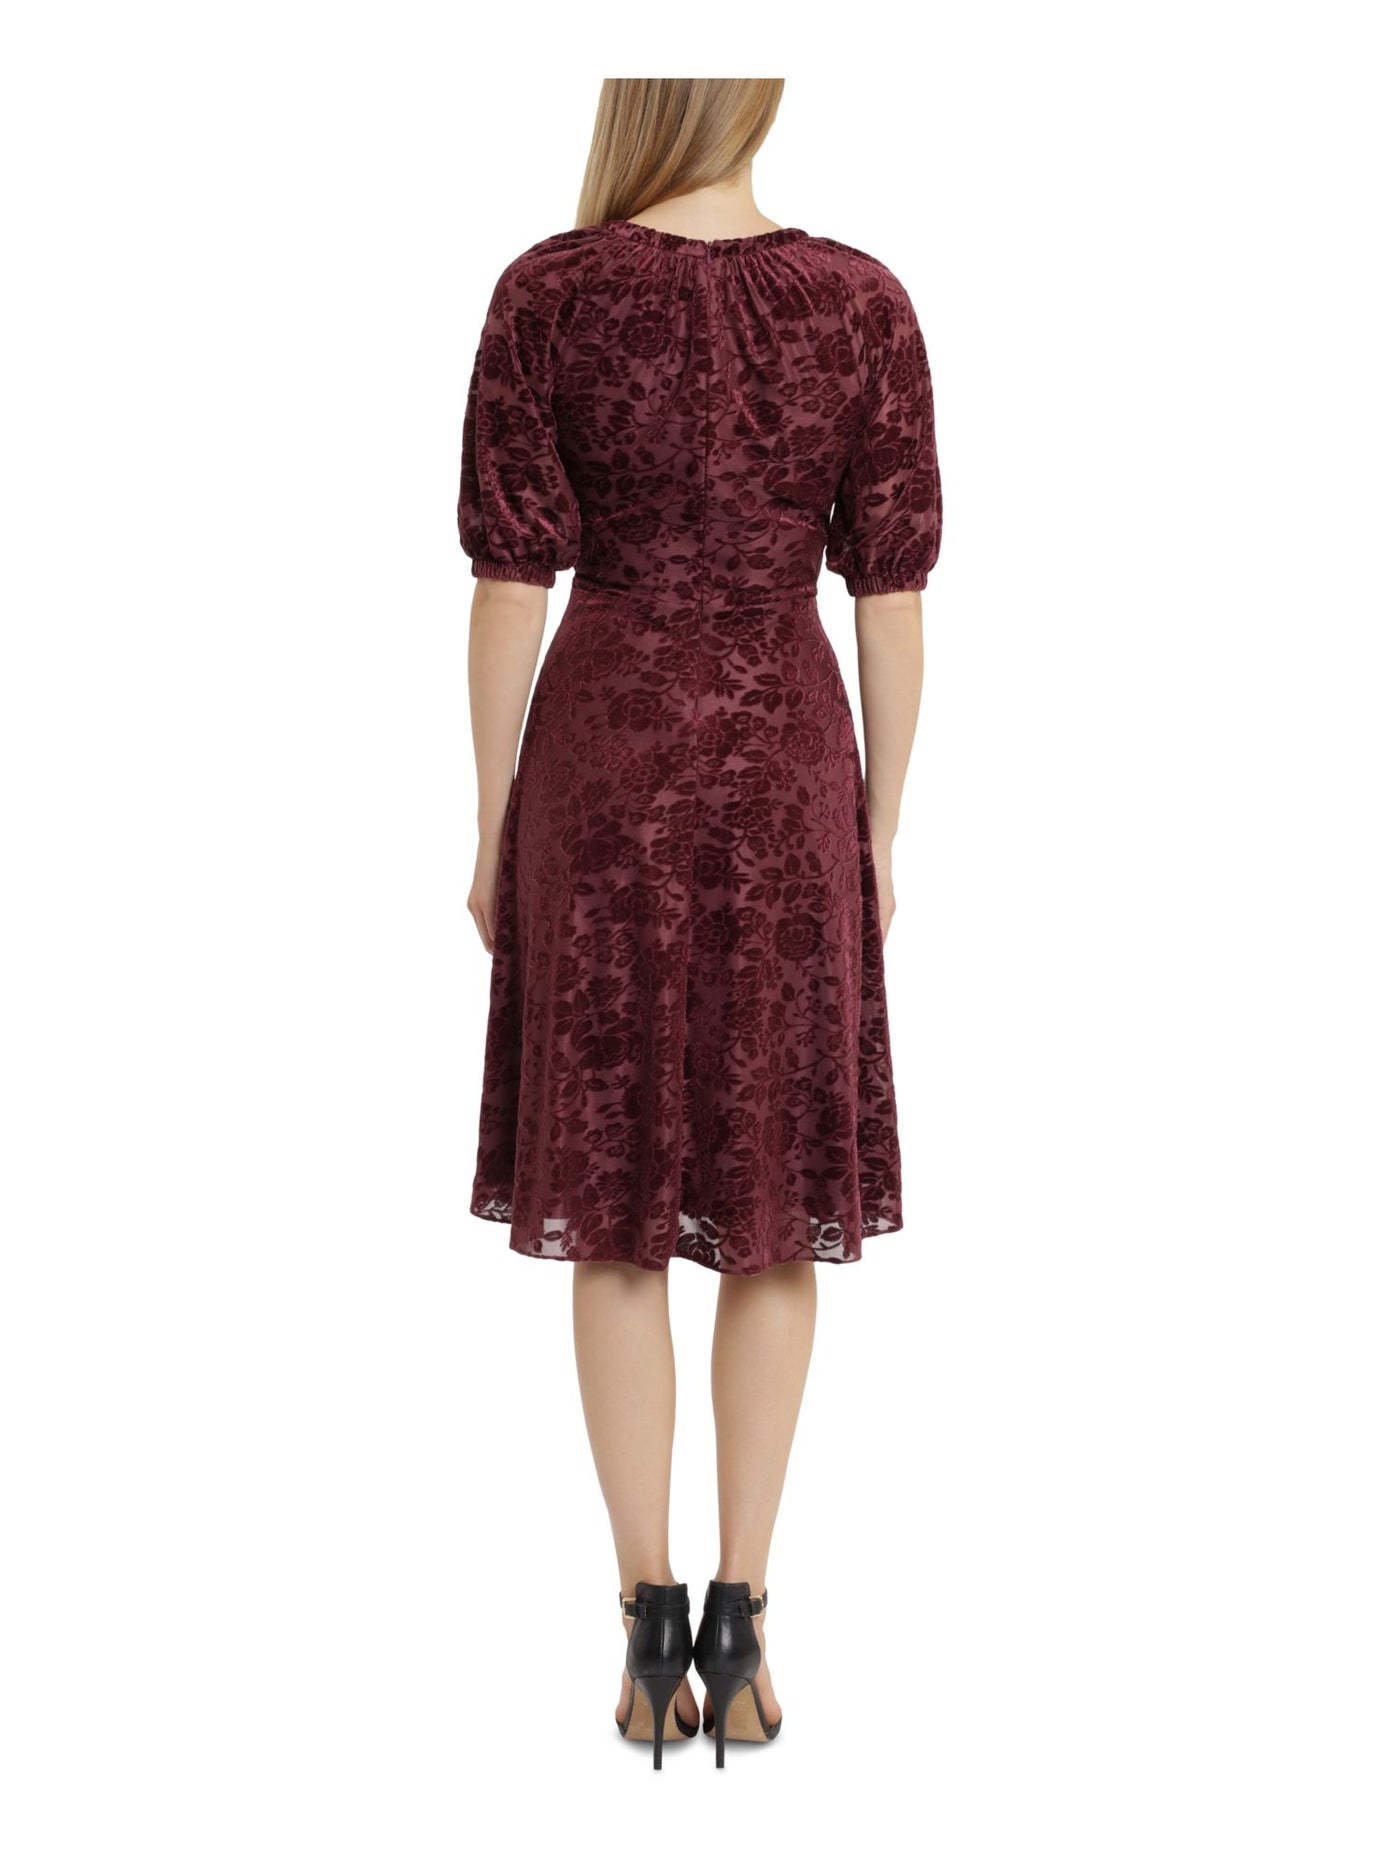 LONDON TIMES Womens Burgundy Zippered Gathered Burnout Velvet Lined Floral Elbow Sleeve Jewel Neck Below The Knee Wear To Work Fit + Flare Dress Petites 10P